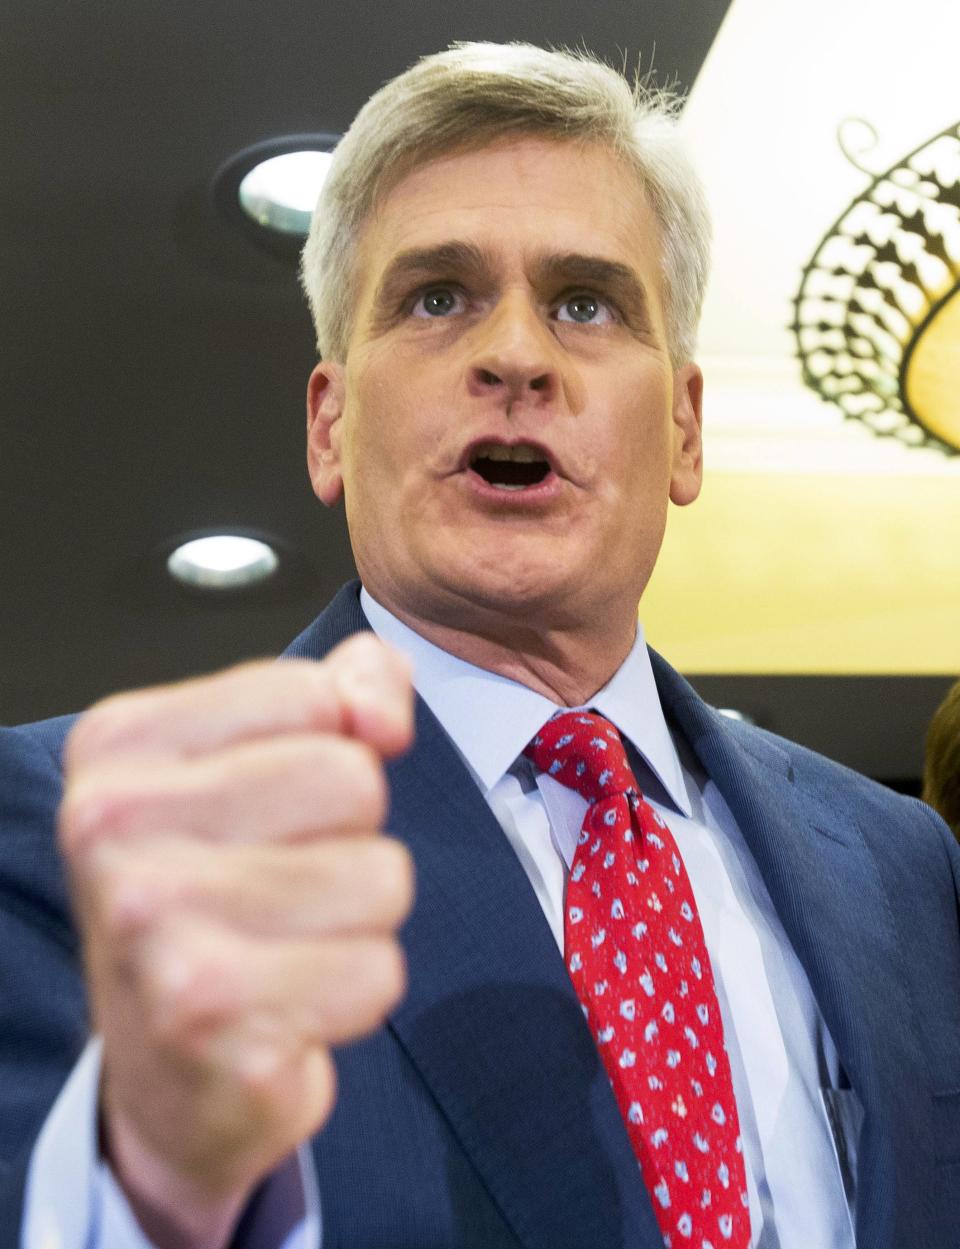 Republican Bill Cassidy addresses supporters in 2014 in Baton Rouge, Louisiana.